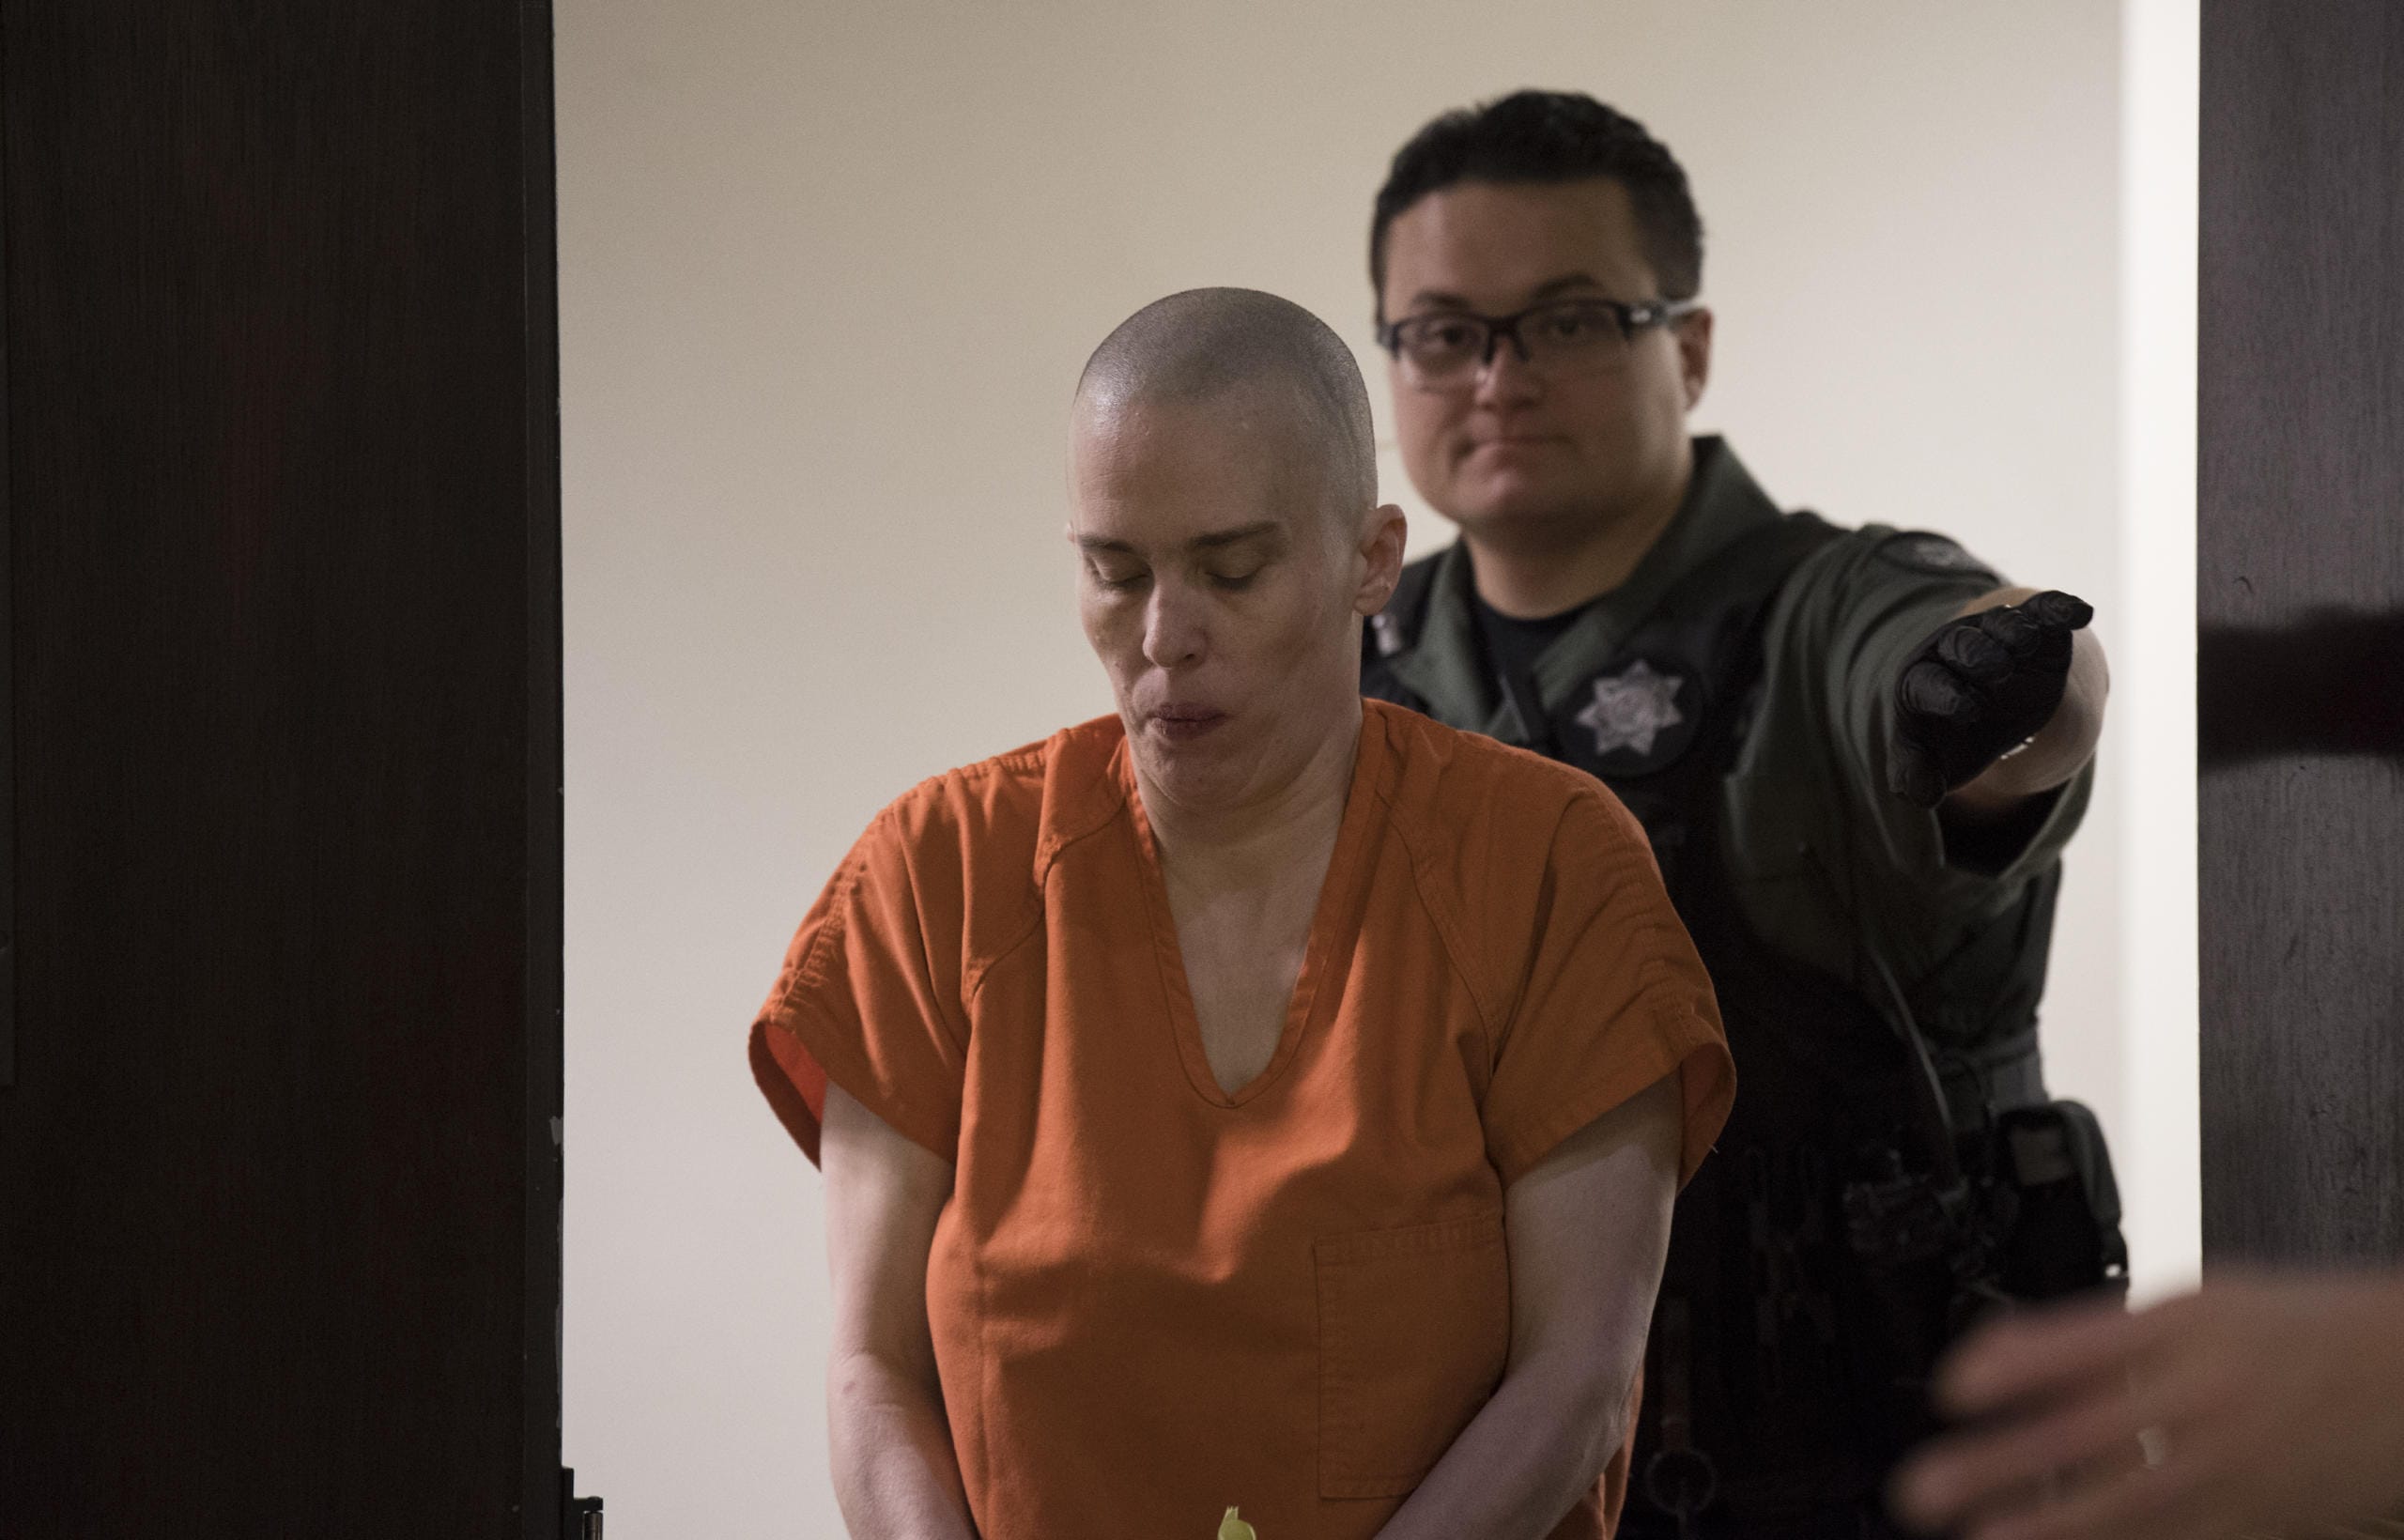 Rima L. McQuestion, 44, leaves the courtroom after appearing Thursday in Clark County Superior on suspicion of first-degree assault, a potential charge stemming from an alleged knife attack that left her sister hospitalized with life-threatening injuries.